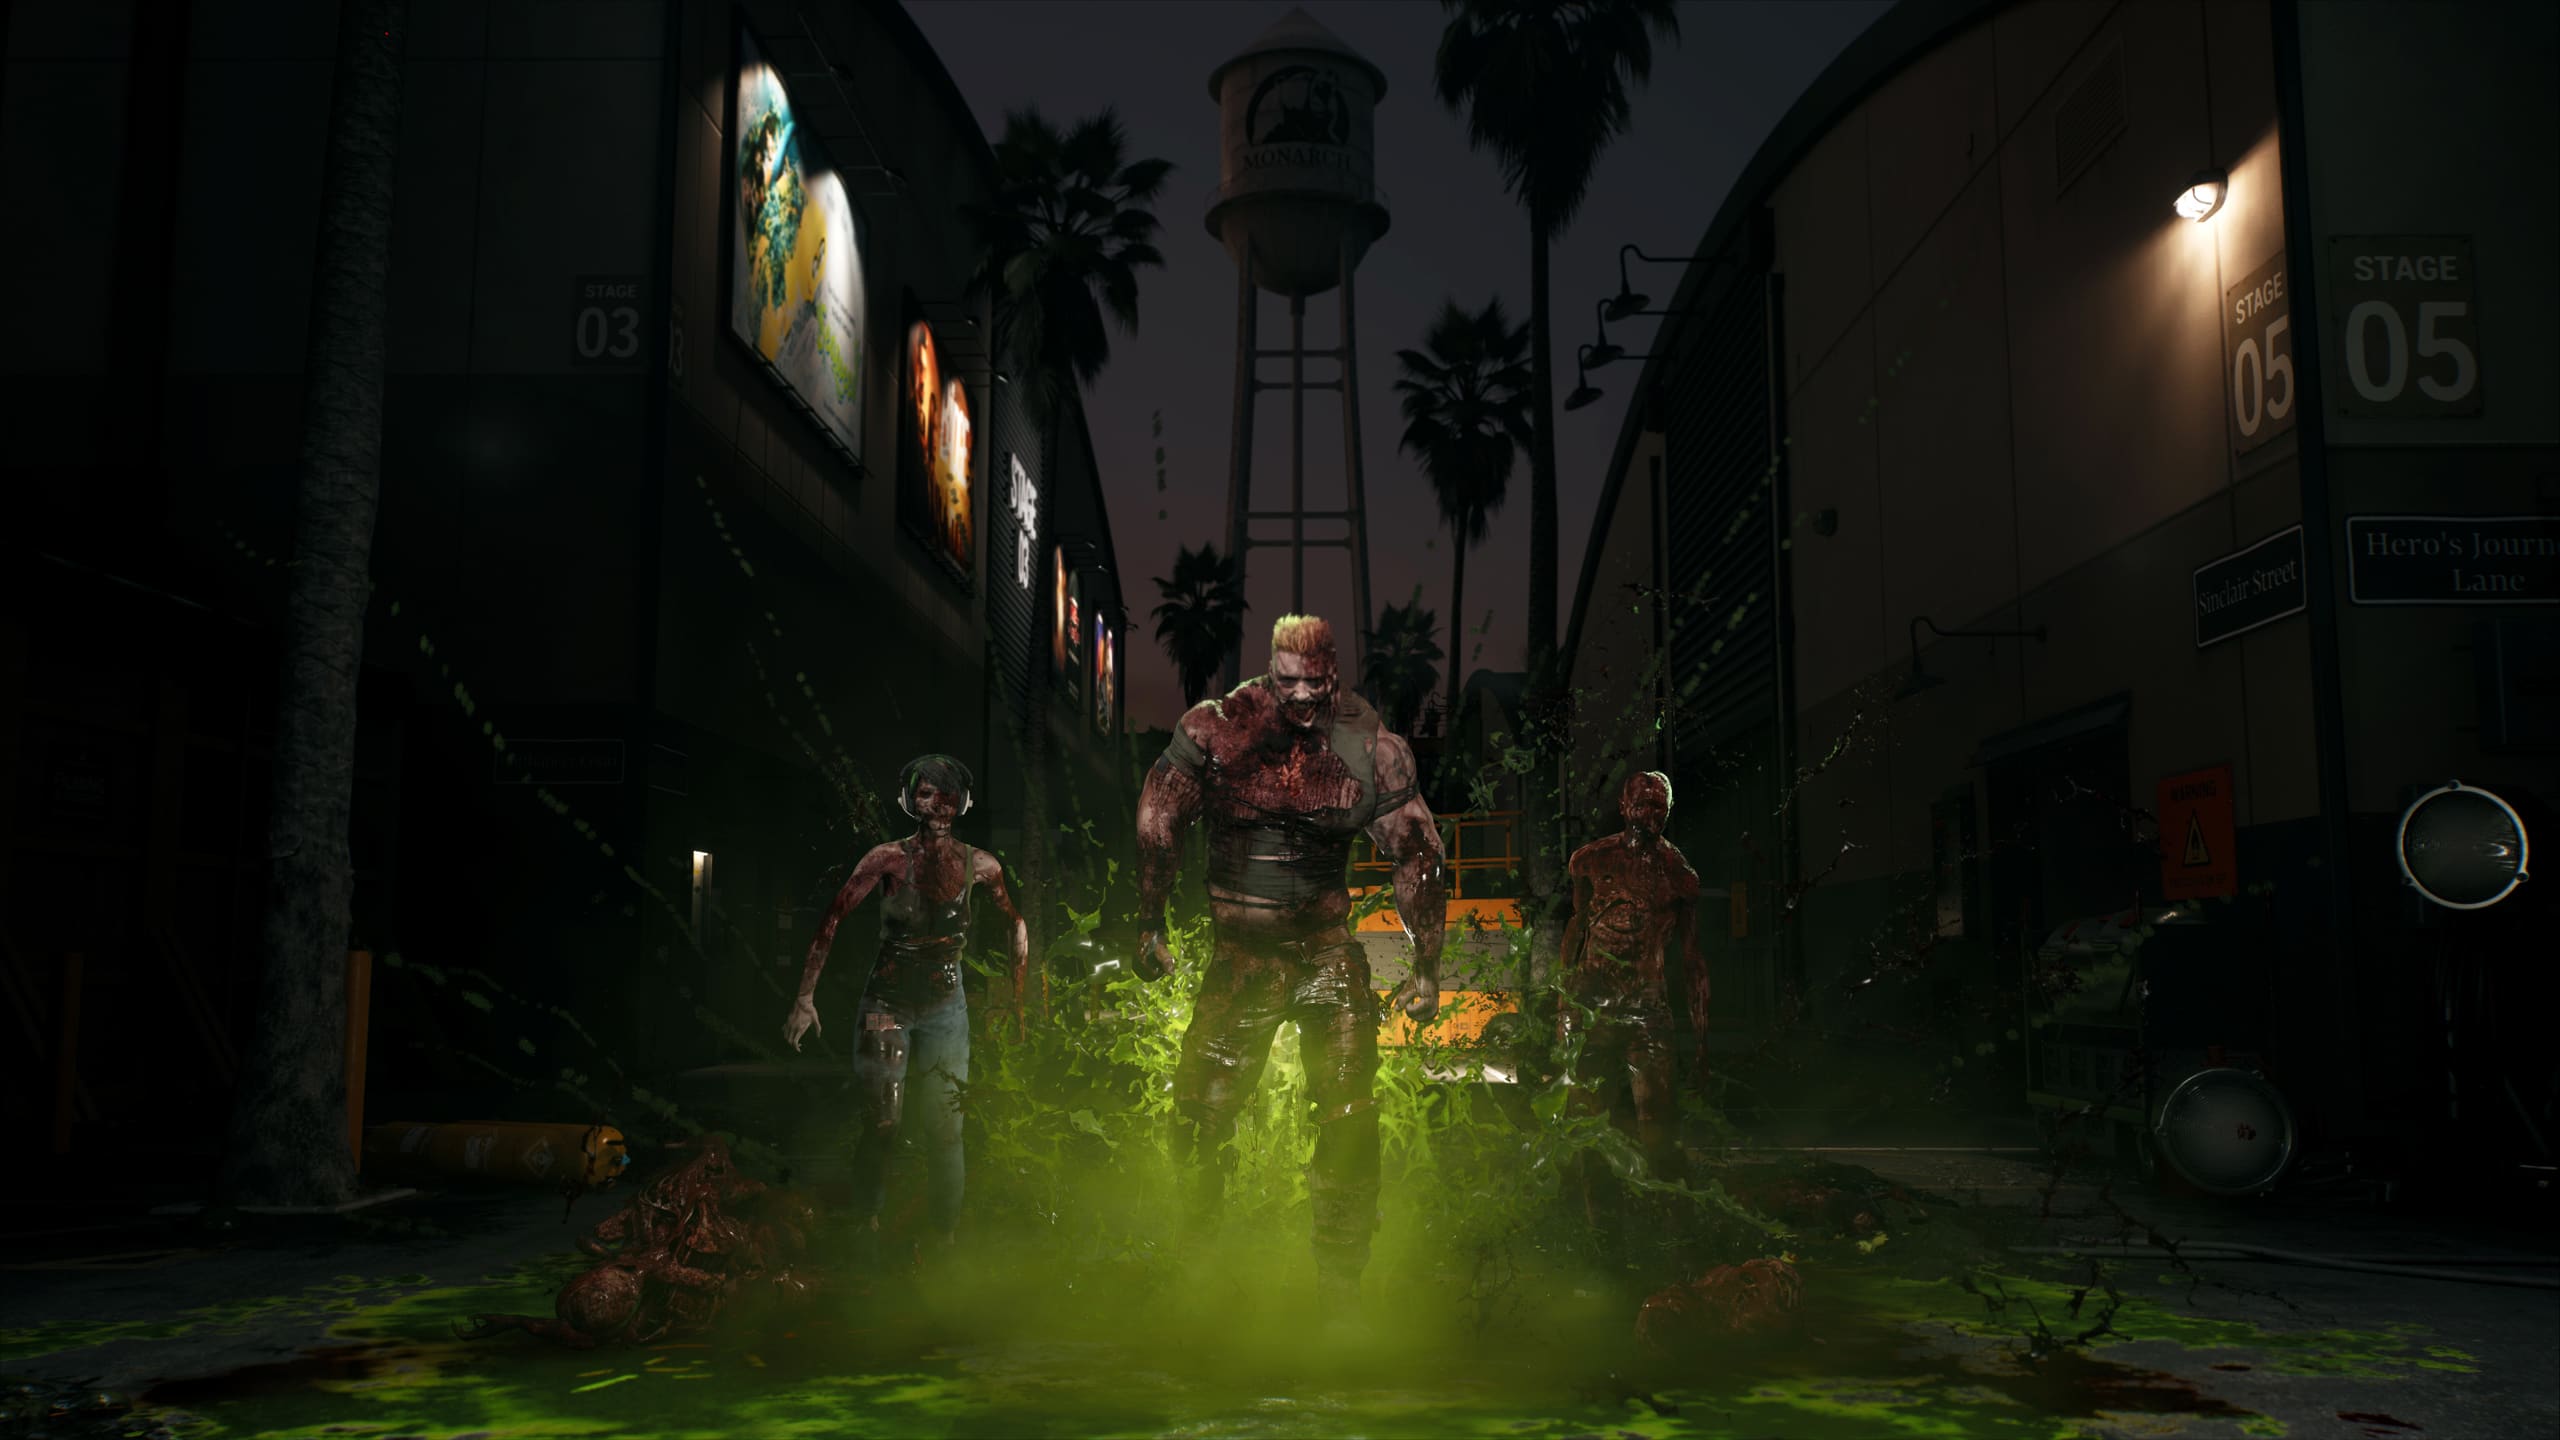 Dead Island 2 roadmap details two story expansions